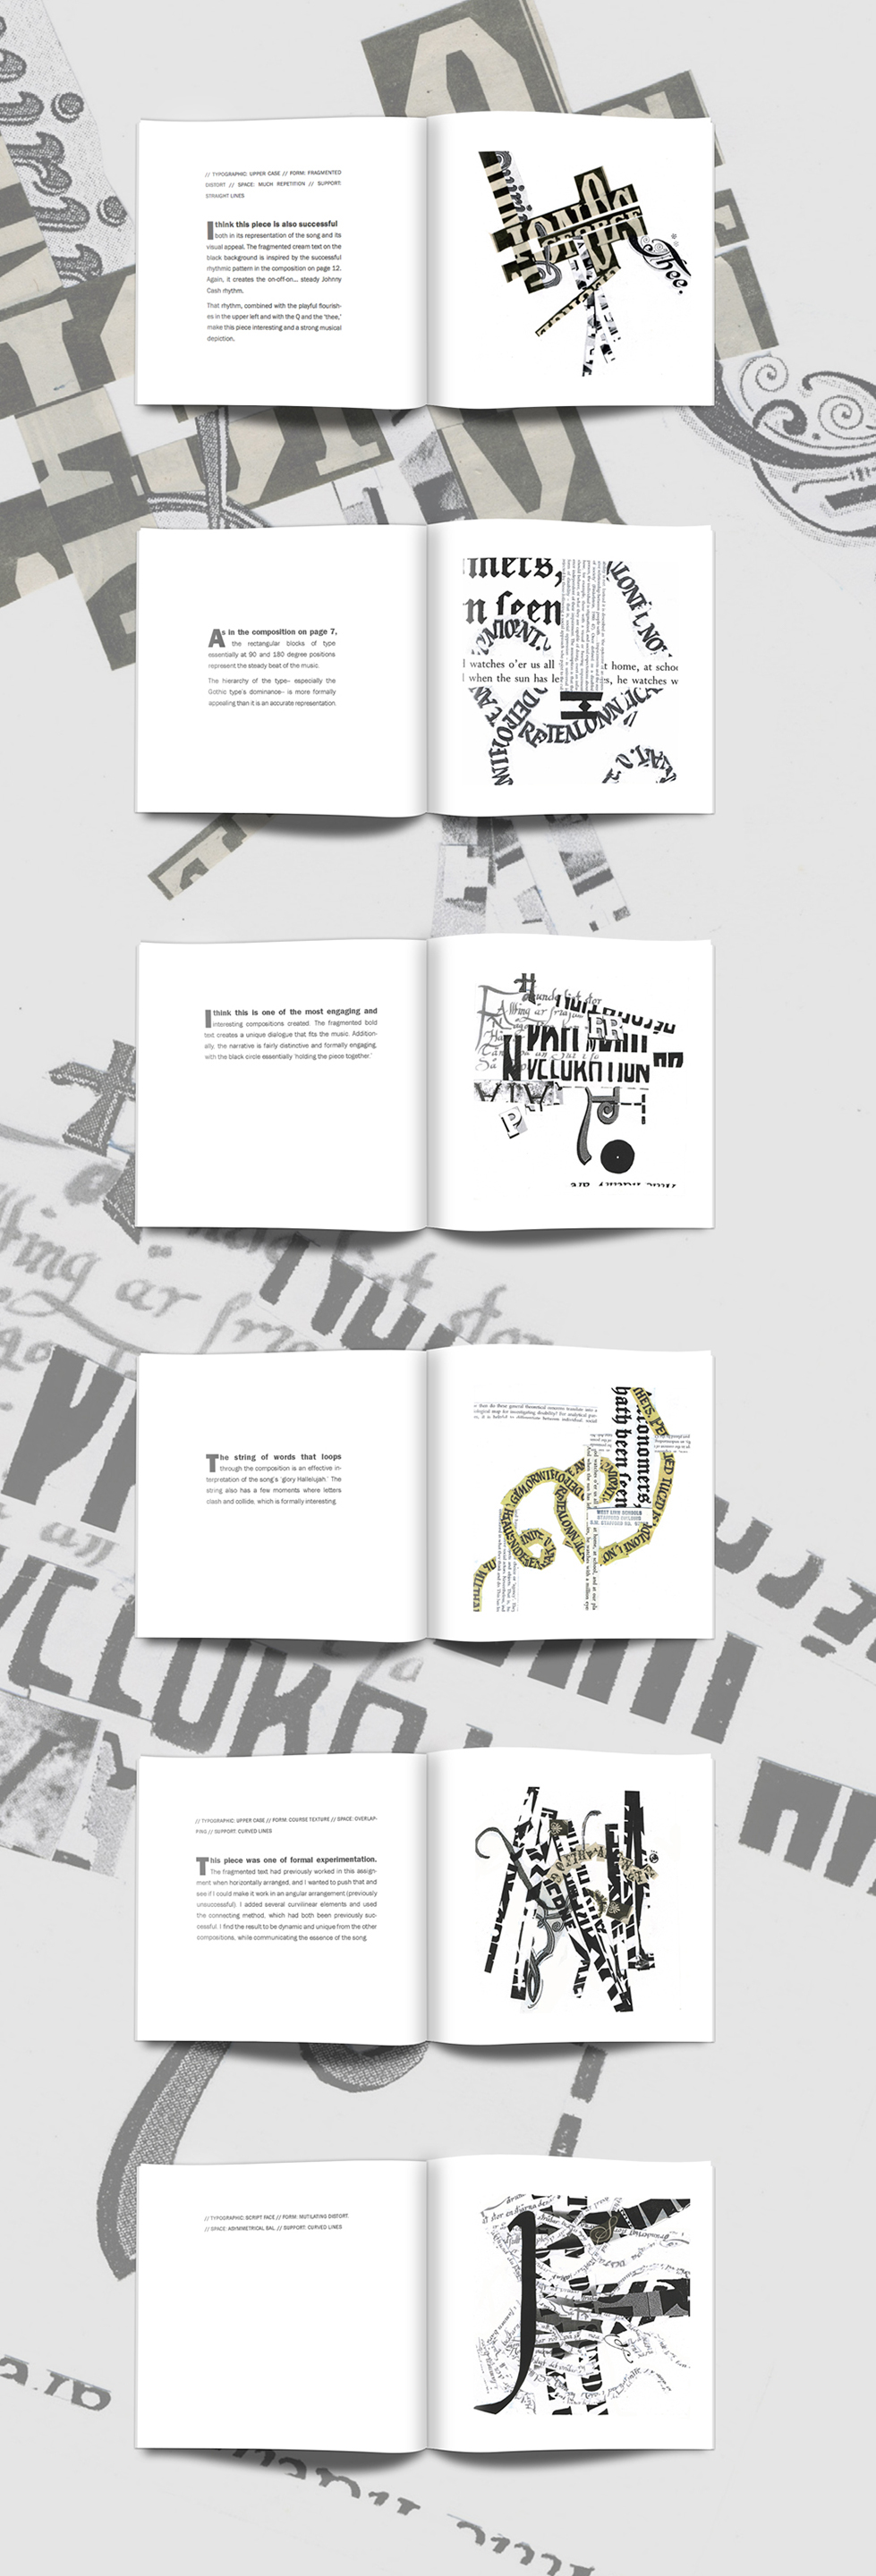 Expressive Typography intuition black & white collage